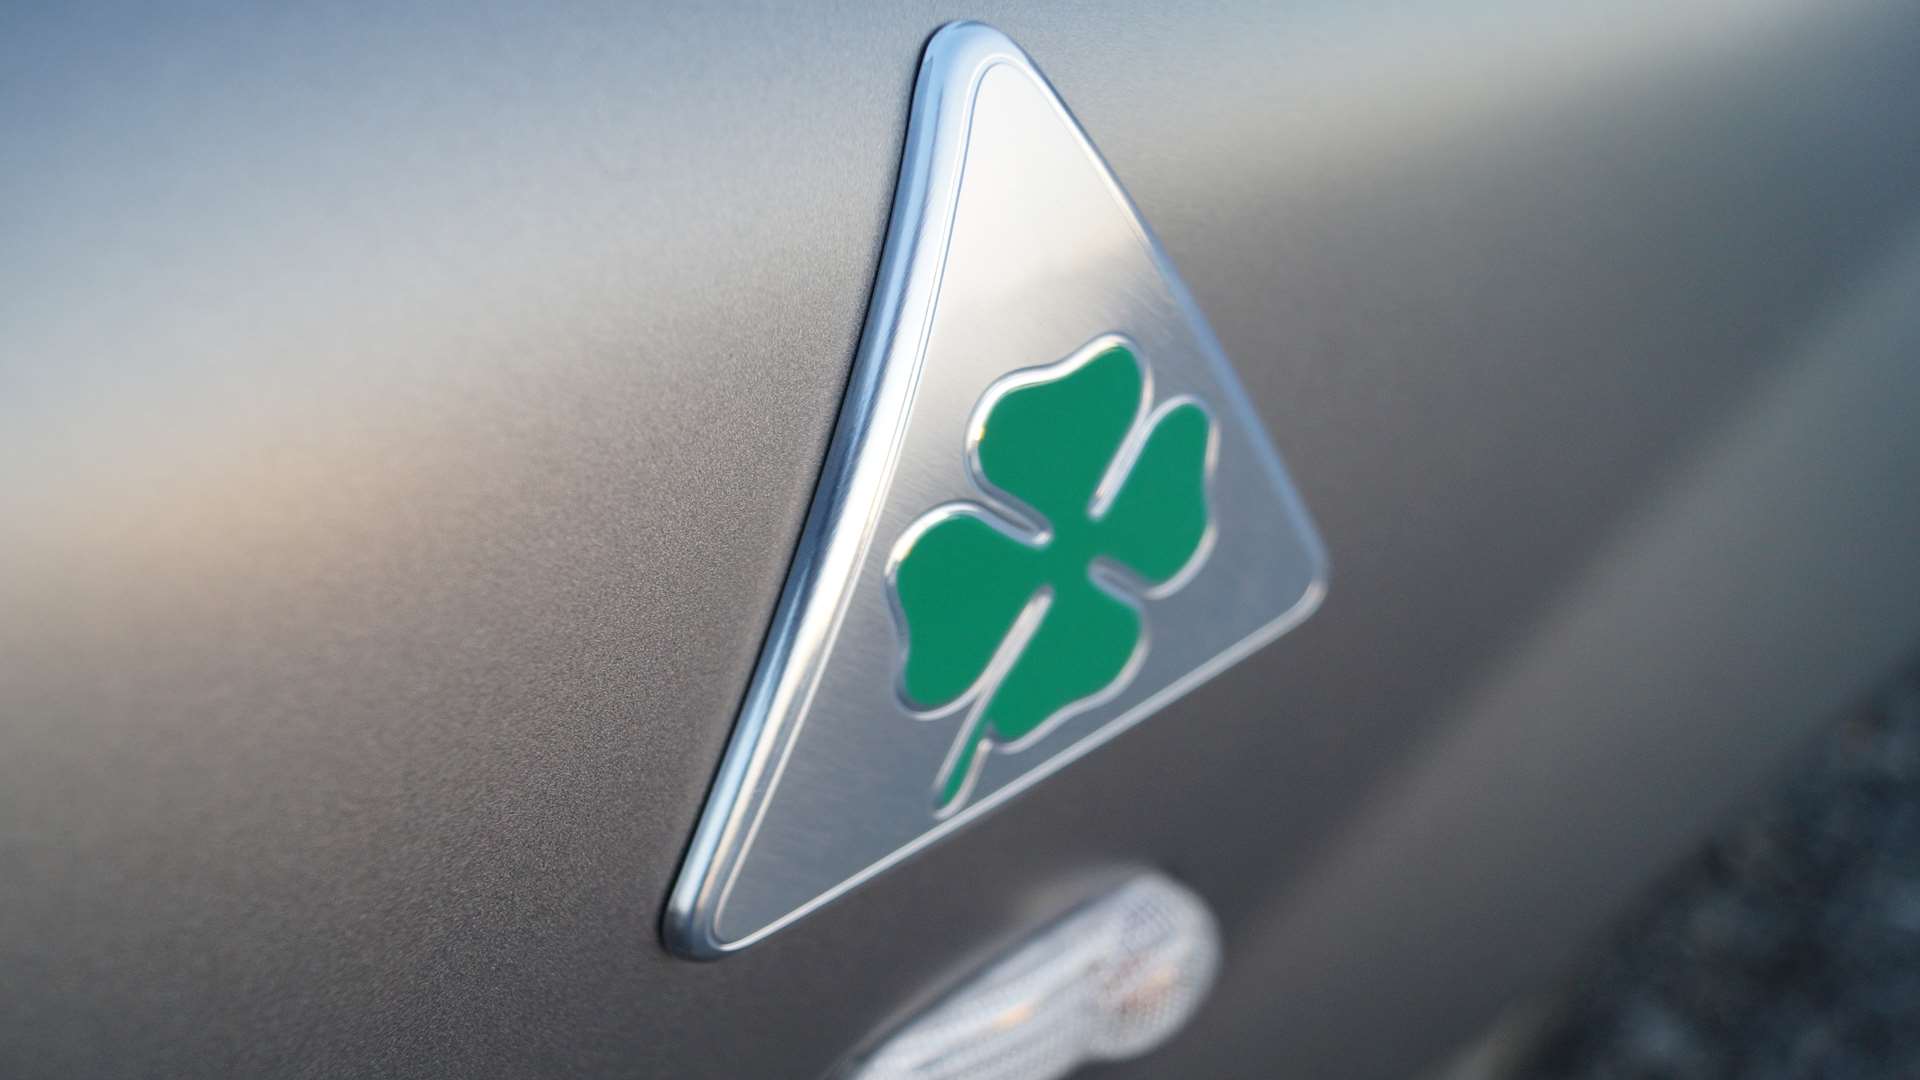 The Quadrifoglio Verde badge is proudly displayed on the front wings